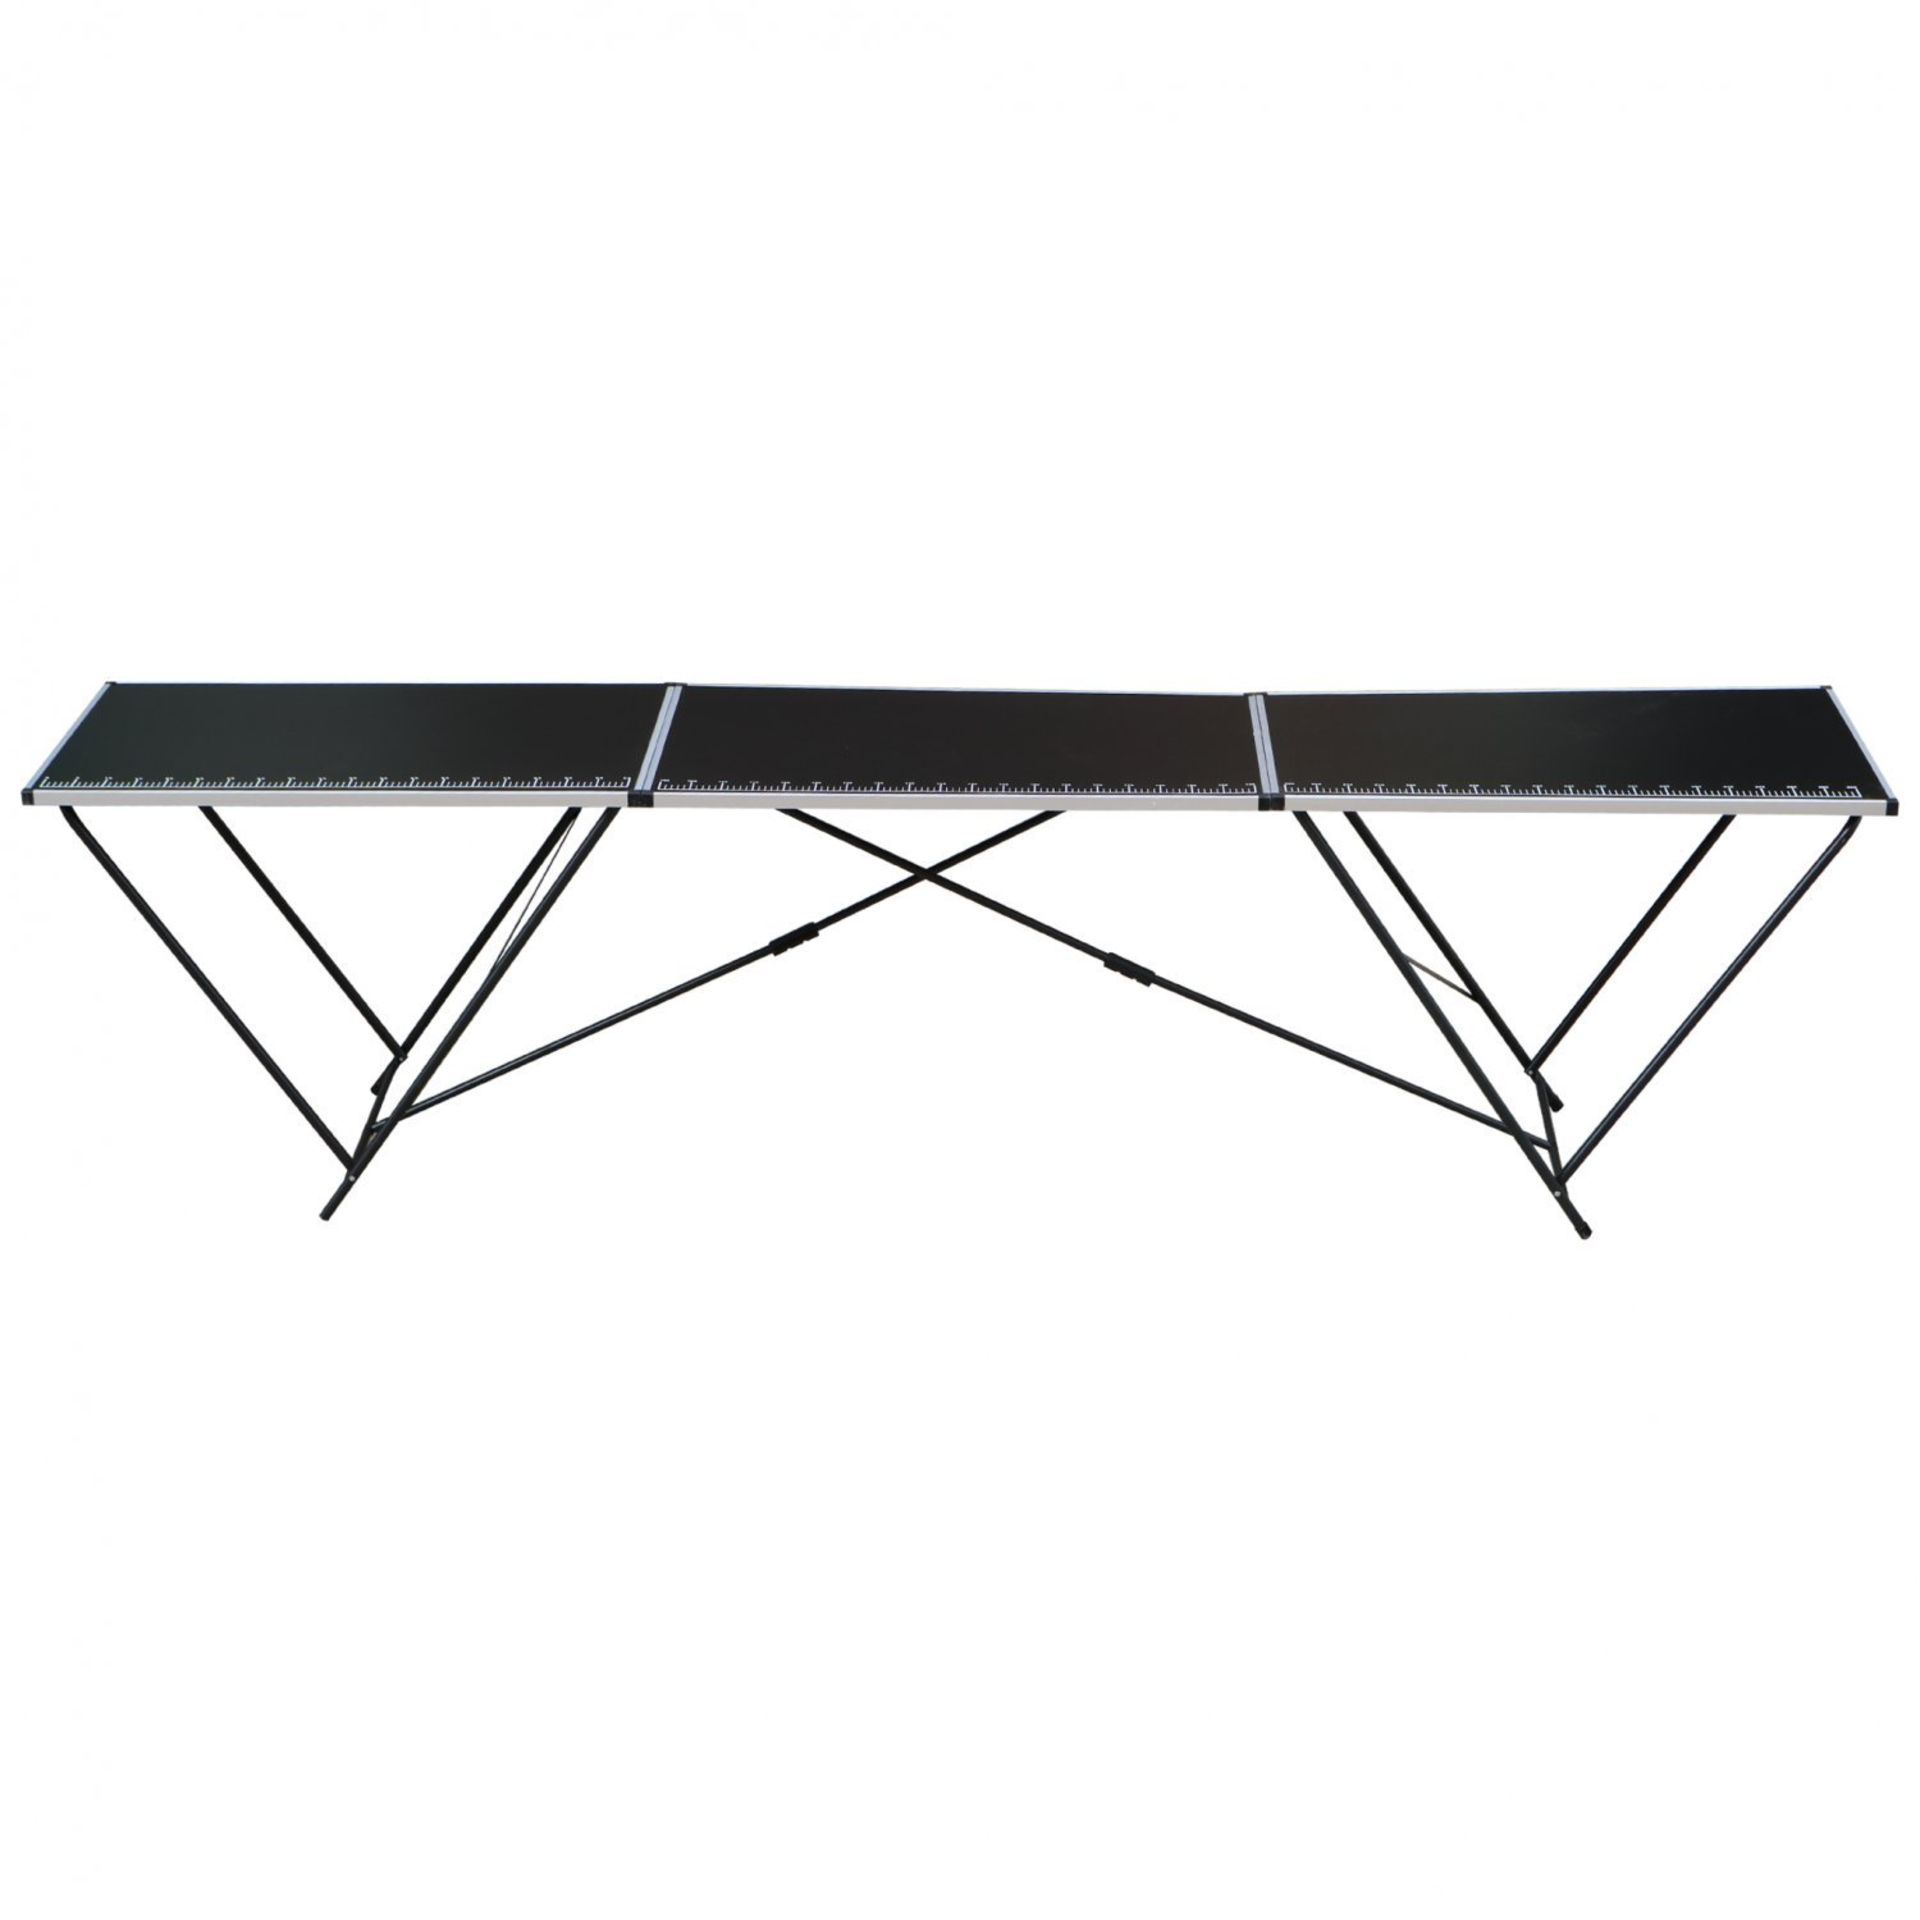 (SK151) 3m Aluminium Folding Wallpaper Pasting Decorating Table The pasting table is ideal... - Image 2 of 2